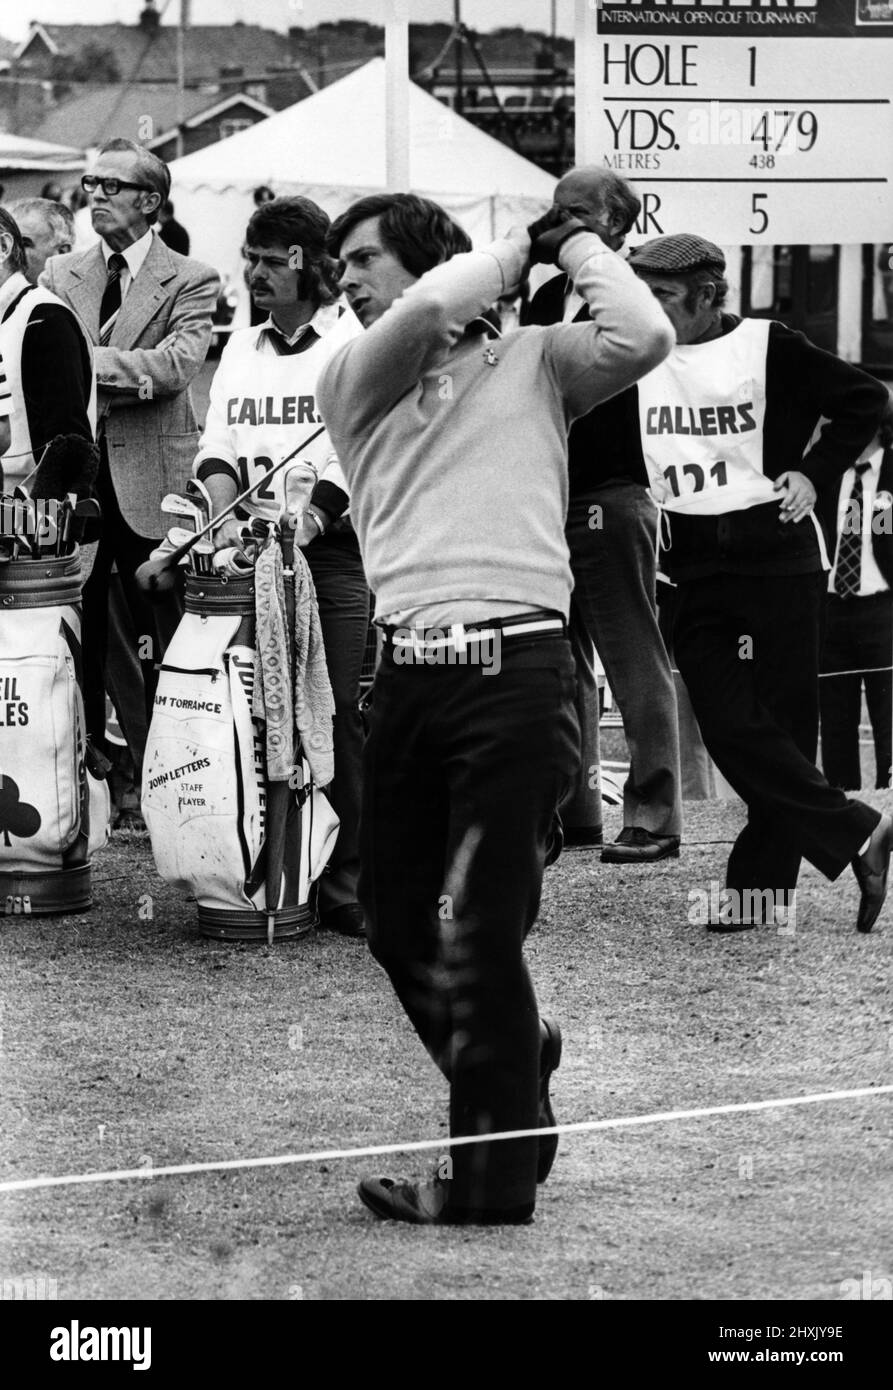 Doug McClelland, Doug McClelland, studies the line of his putt during the 72 holes Callers 25,000 pound golf tournament at Whitley Bay, this week, 29th July 1977. Stock Photo